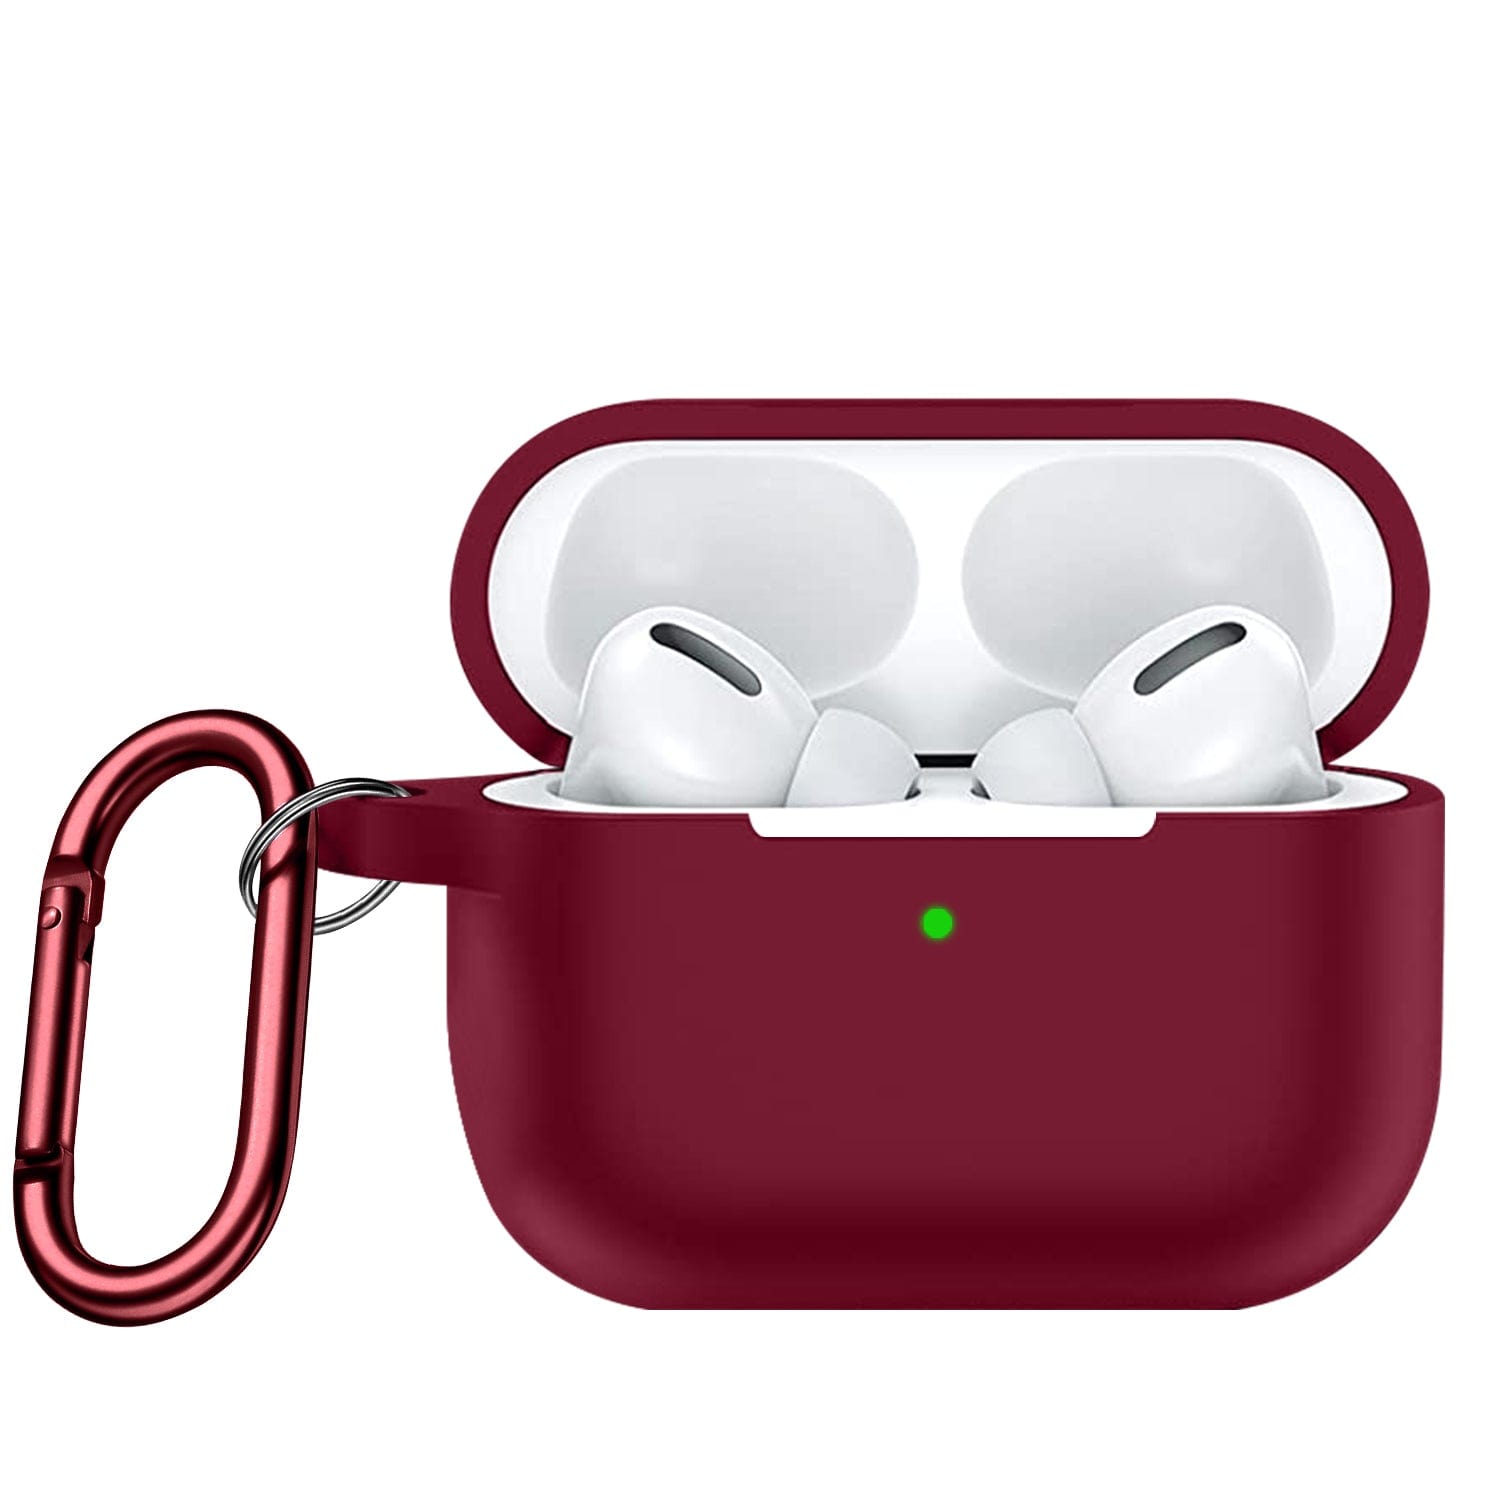 Silicone Case for AirPods Pro 2 (2nd Generation) - Burgundy